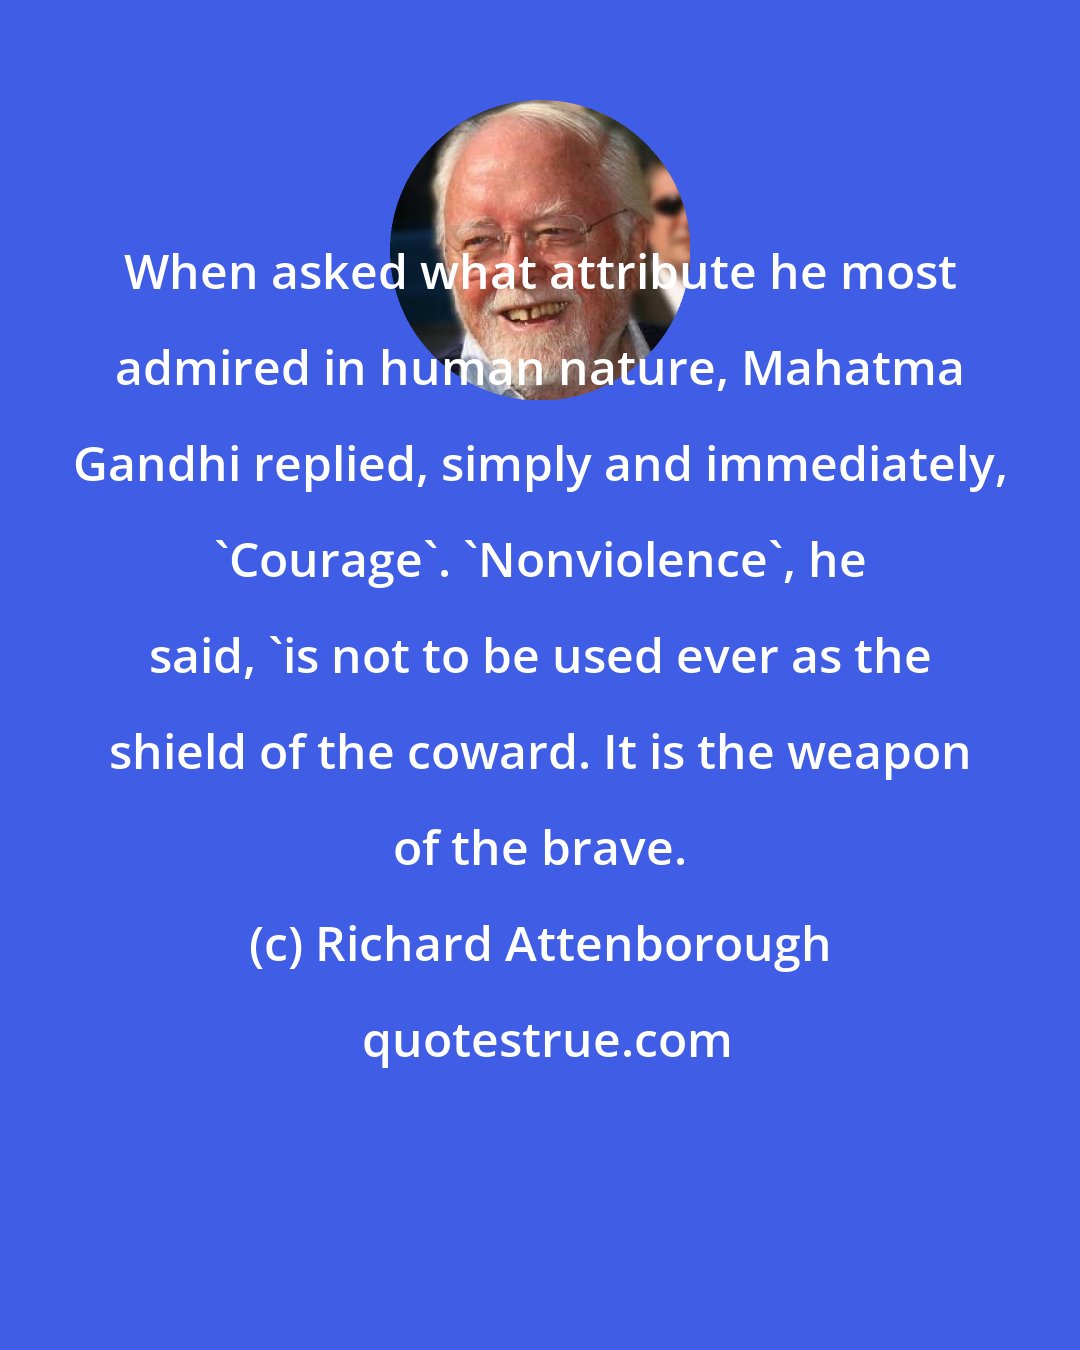 Richard Attenborough: When asked what attribute he most admired in human nature, Mahatma Gandhi replied, simply and immediately, 'Courage'. 'Nonviolence', he said, 'is not to be used ever as the shield of the coward. It is the weapon of the brave.